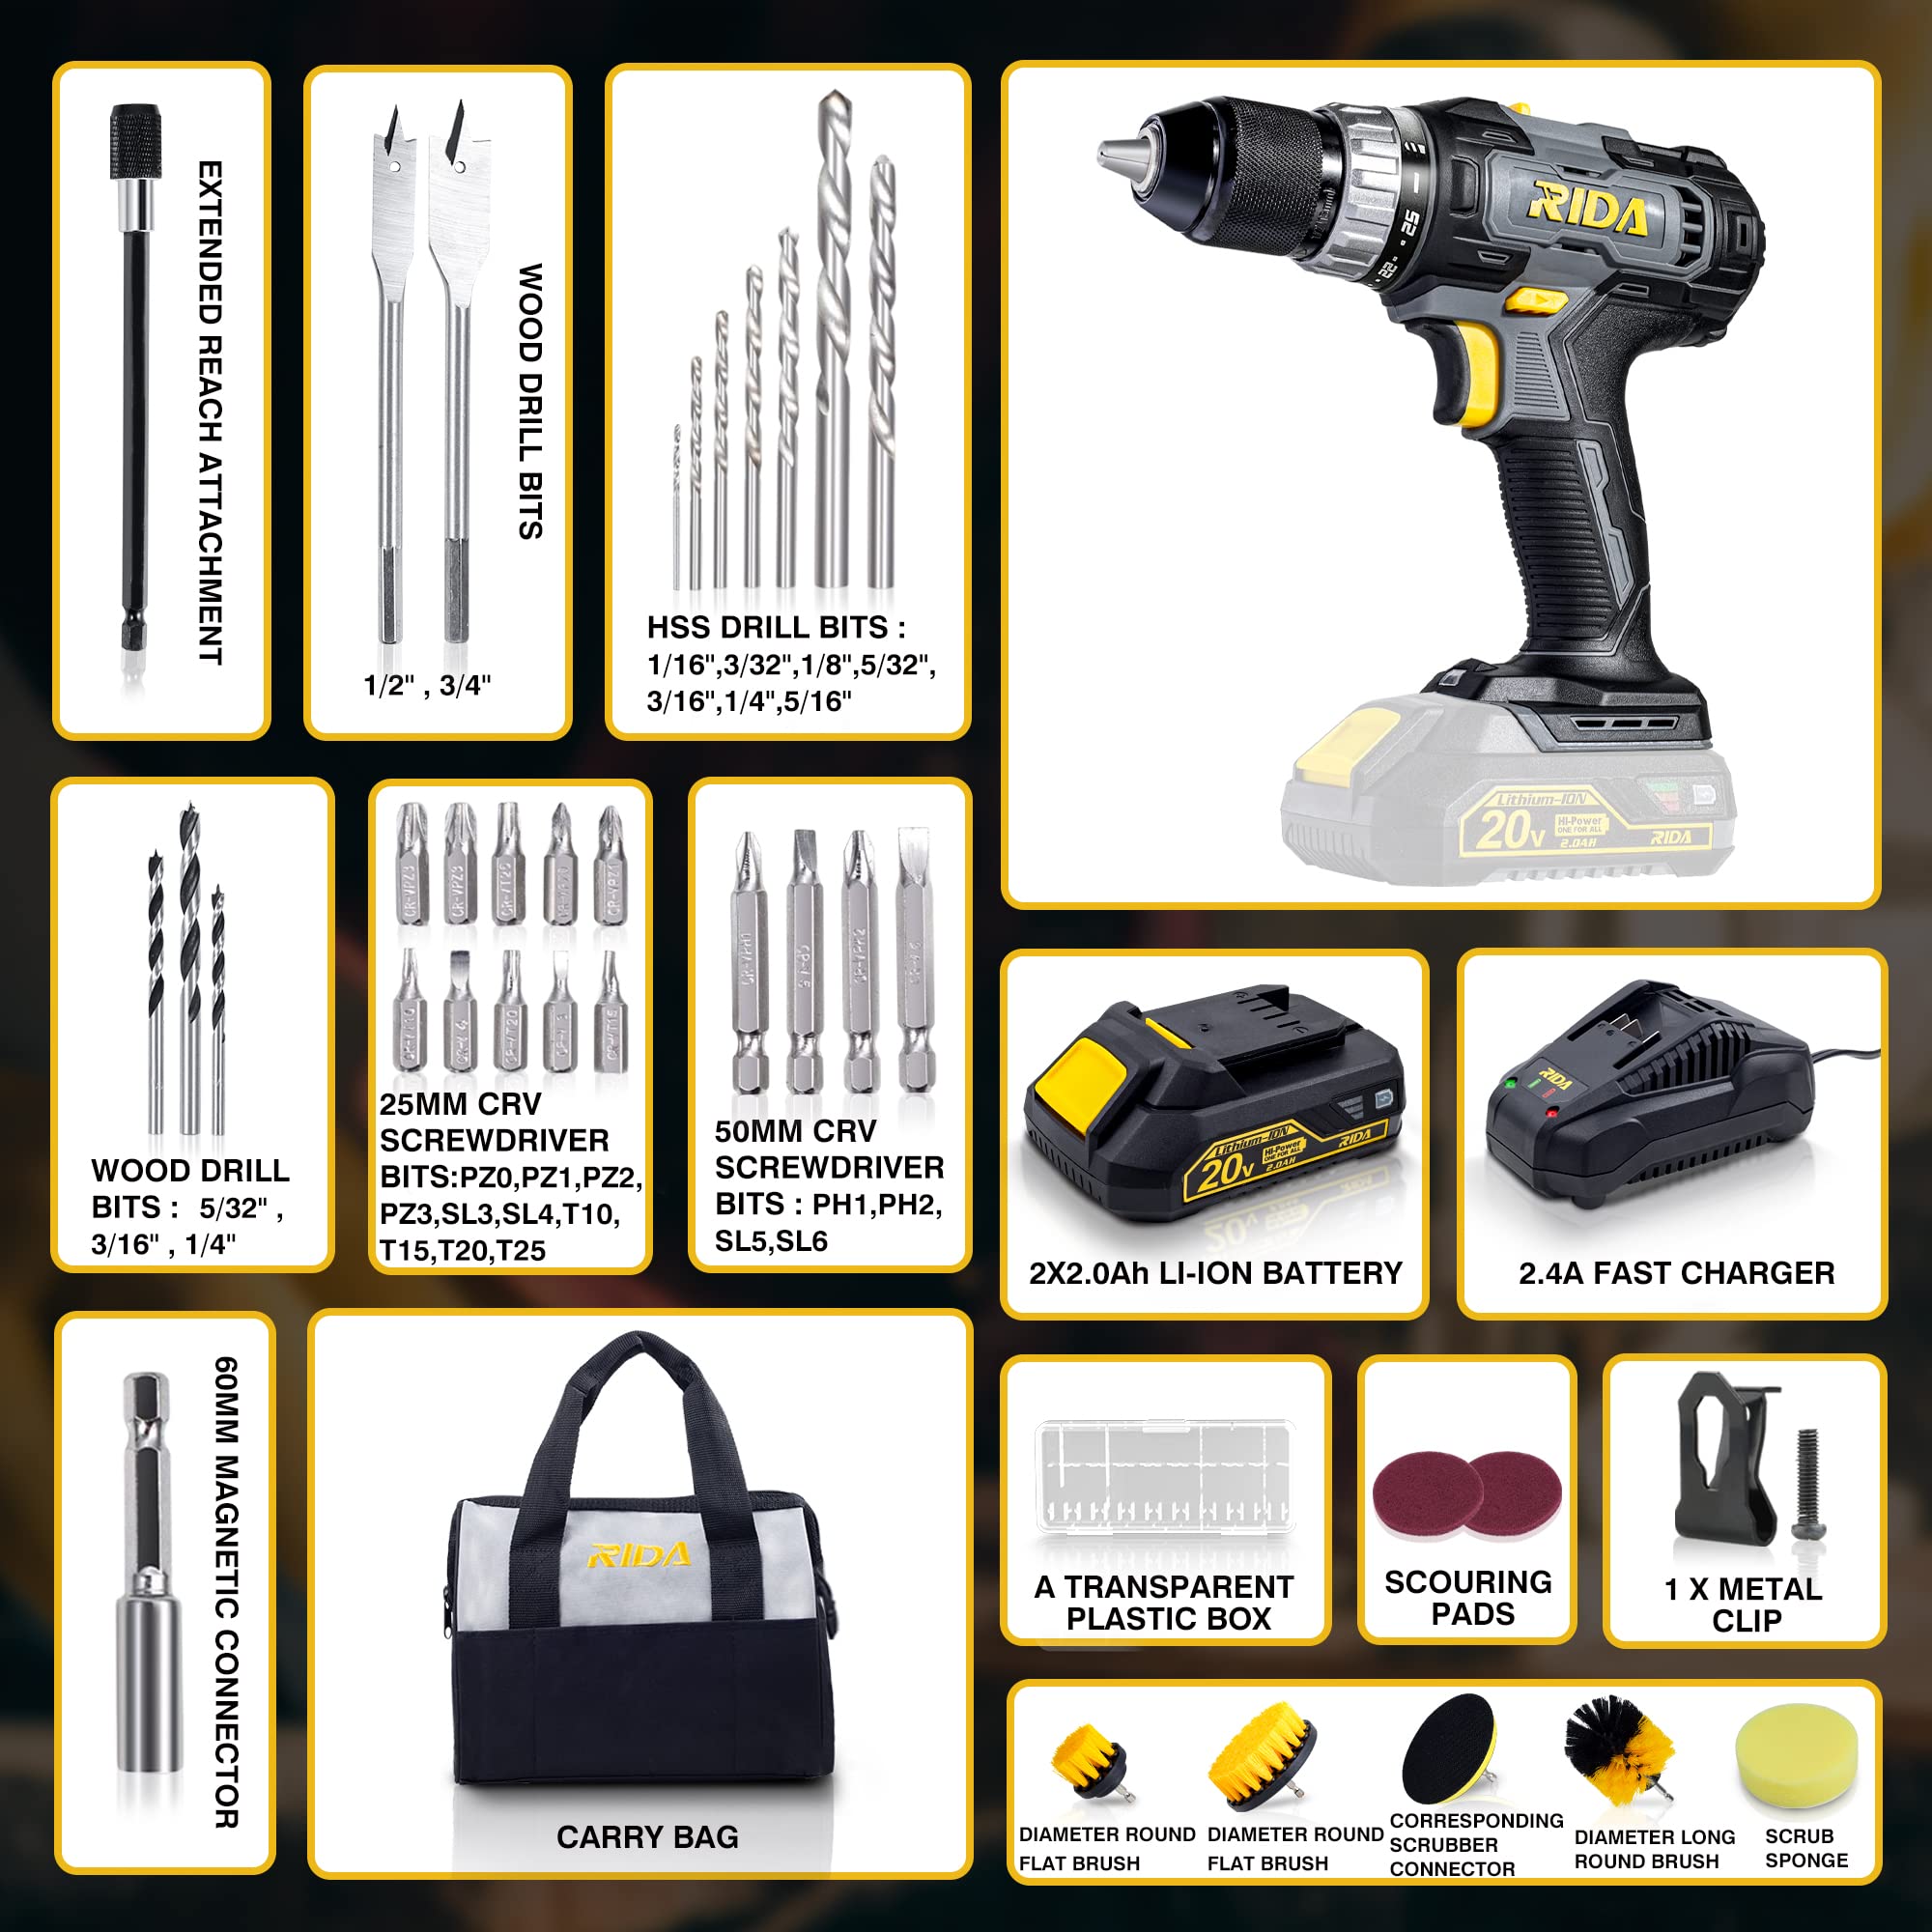 RIDA Cordless Drill 20V Electric Power Drill Set with 2 * 2.0AH Li-Battery & Fast Charger 1/2'' Keyless Metal Chuck, Variable Speed, 25+1 Position and 37Pcs Bits & Cleaning Brush with Carry Bag